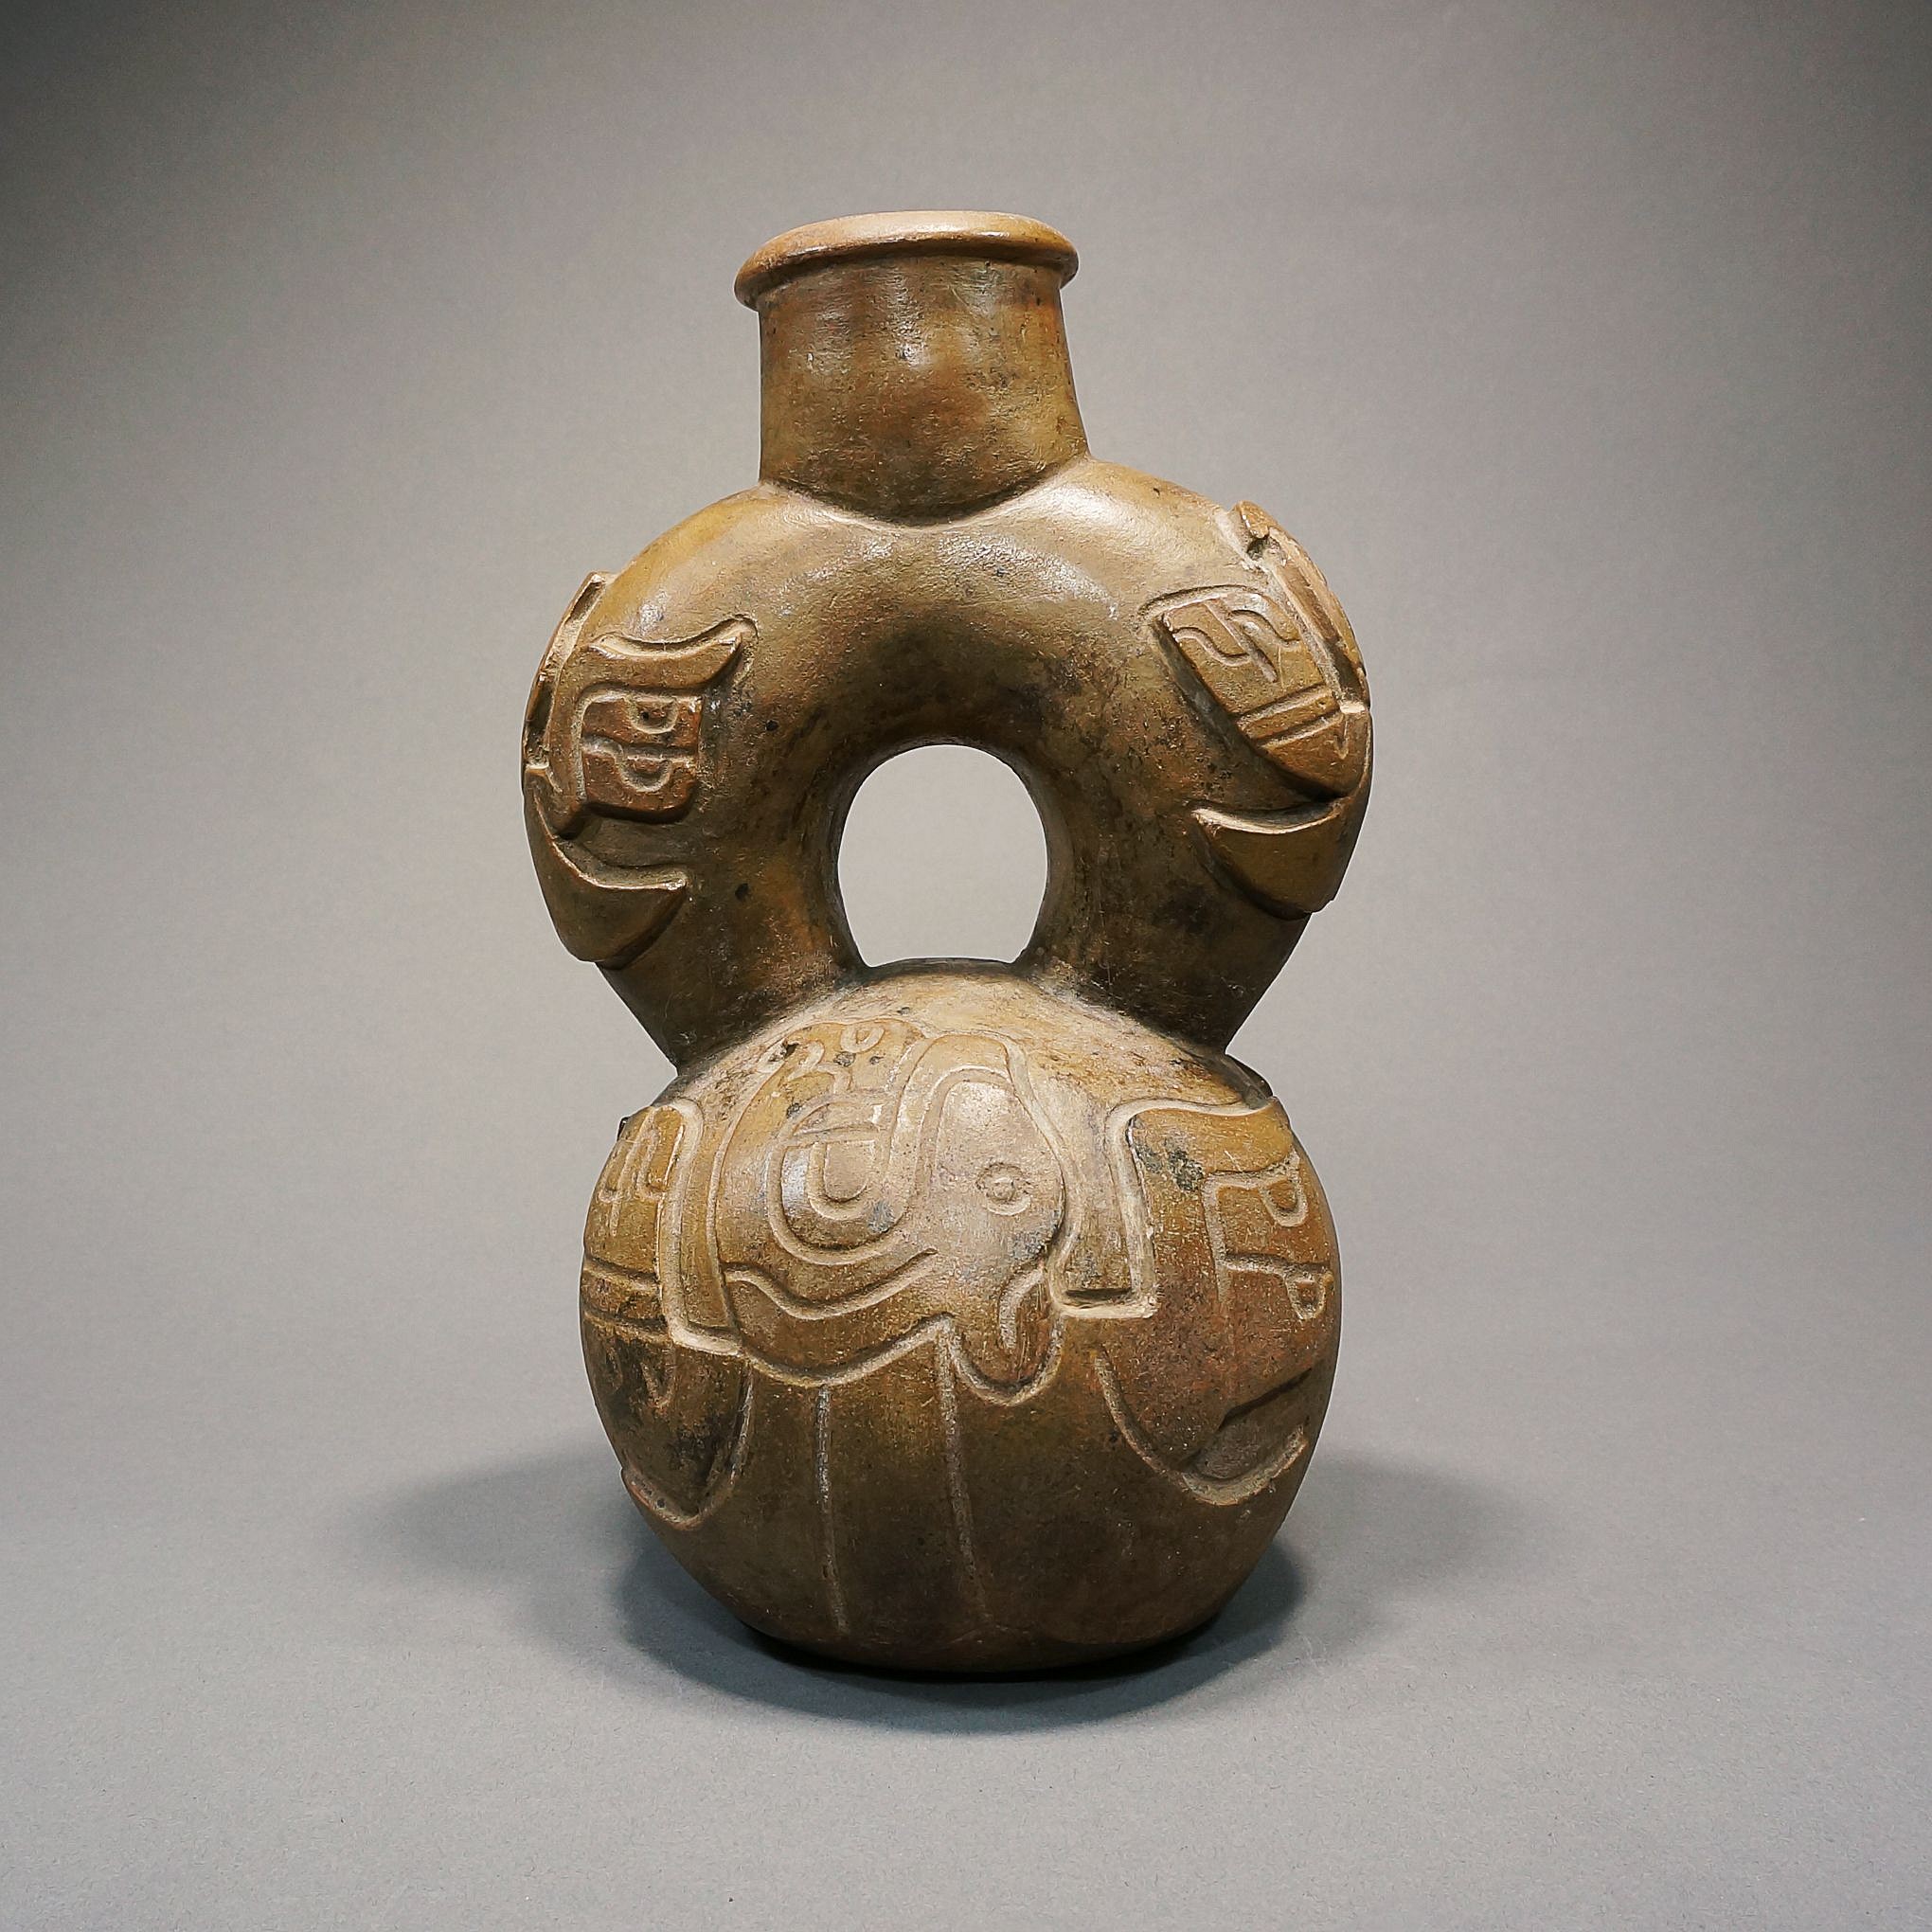 Peru, Chavin Cupisnique Style Stirrup spout Vessel Decorated with a Harpy Eagle.
Media: Ceramic
Dimensions: Height: 8"
Price Upon Request
n2067